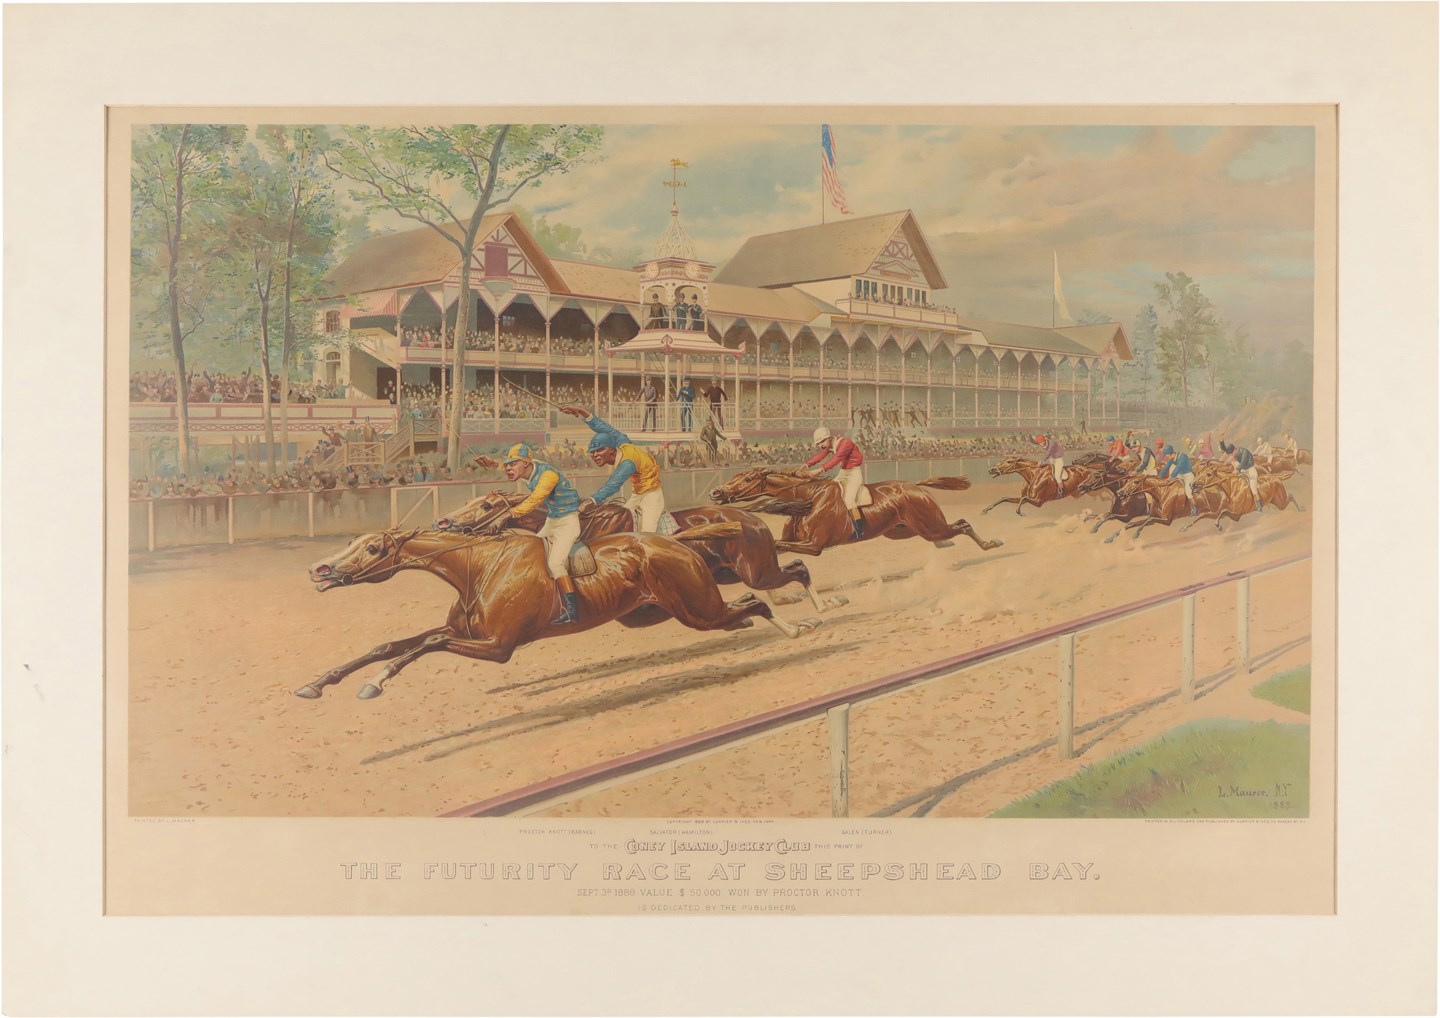 Outstanding 1888 Currier & Ives Original Print of The Futurity Race at Sheepshead Bay